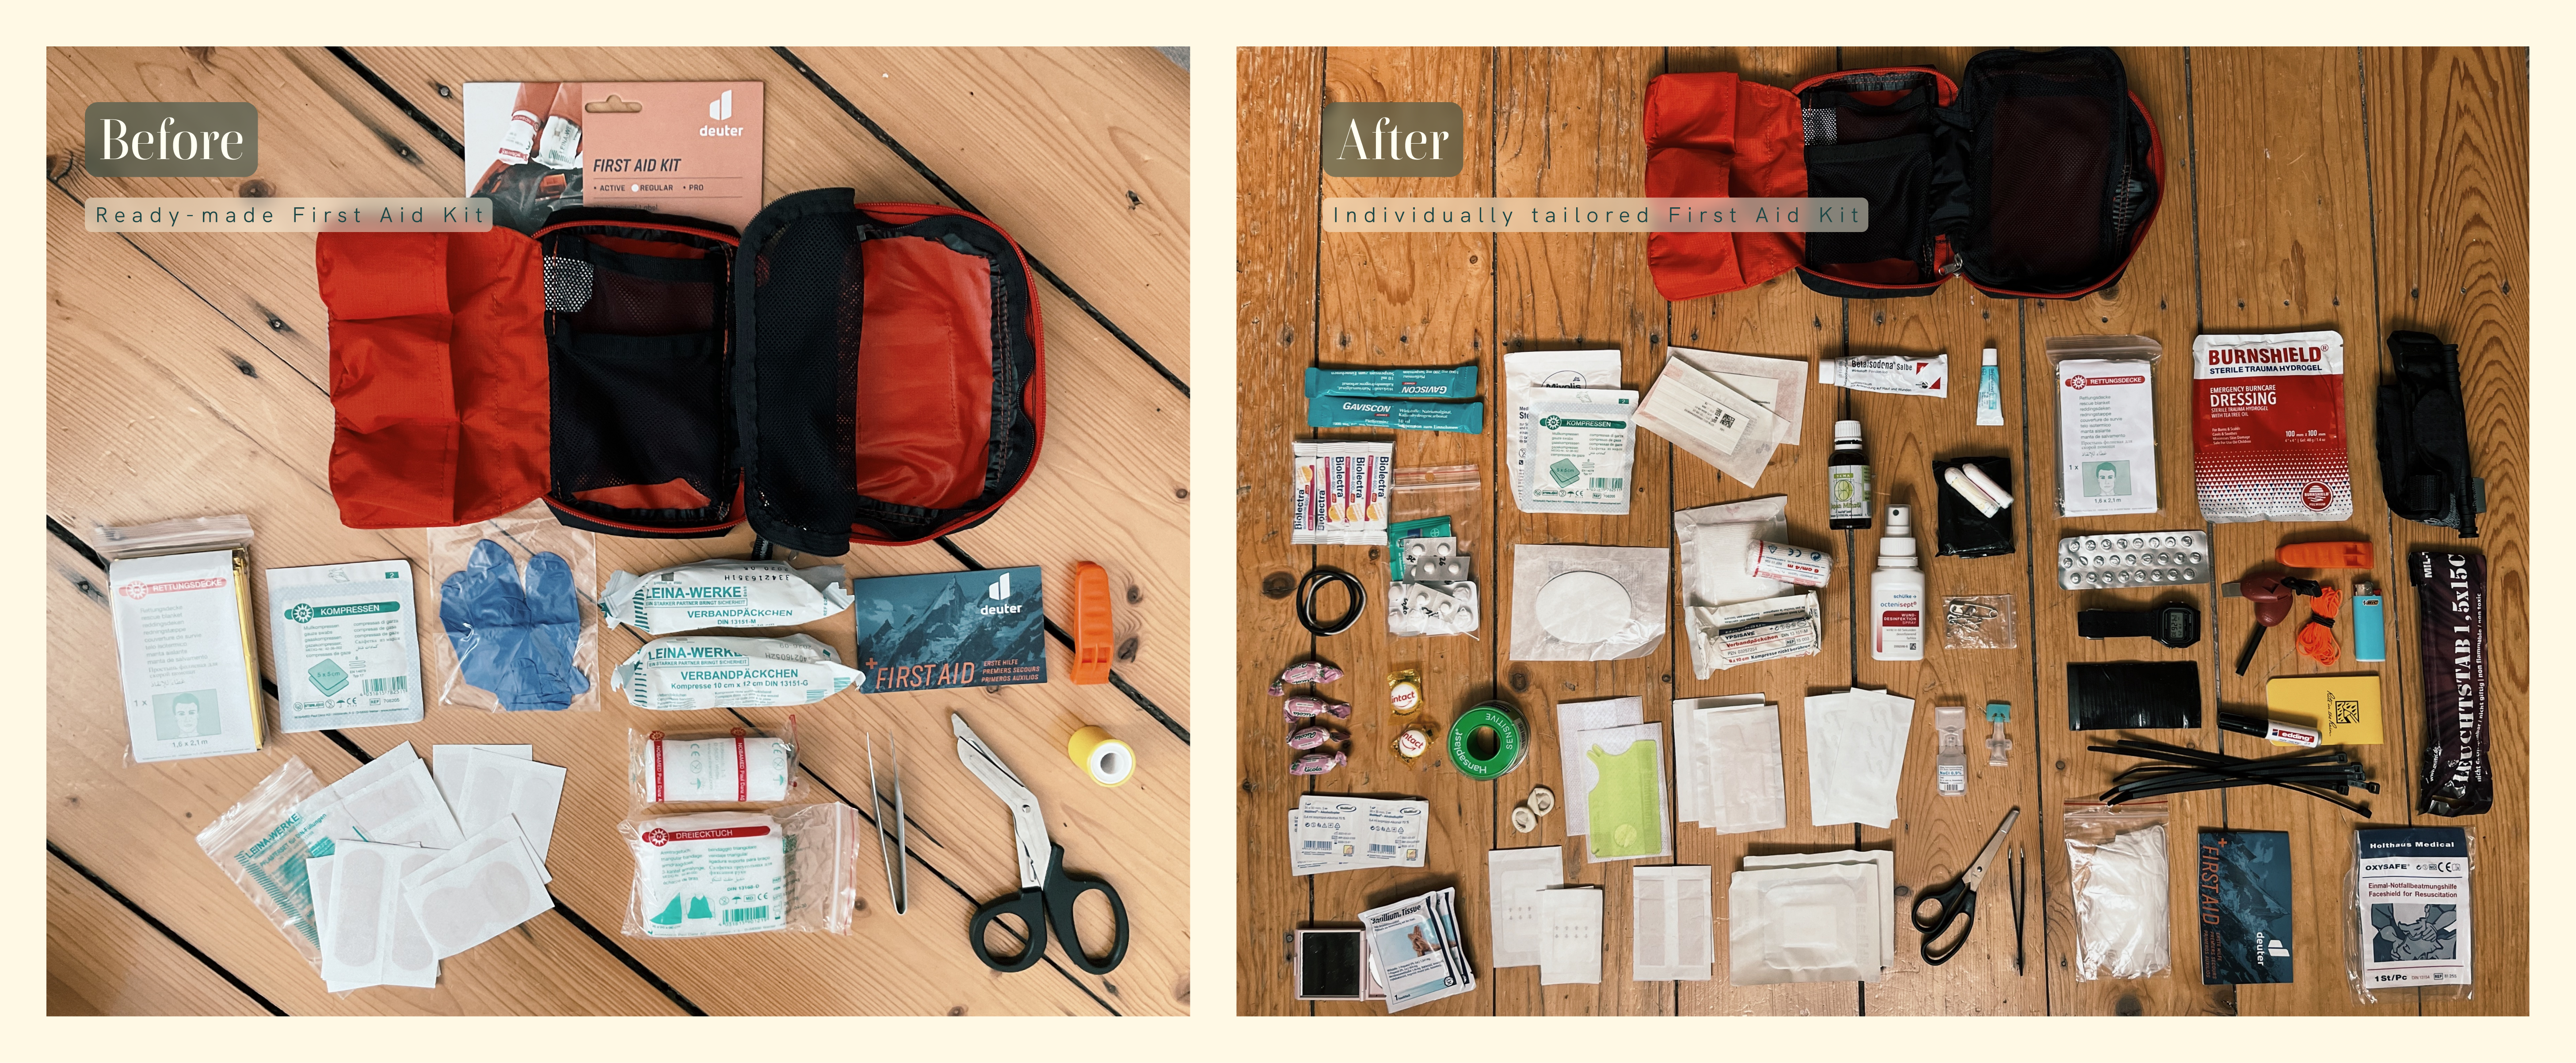 Individually Tailored First Aid Kit for Hiking and Outdoor Adventures